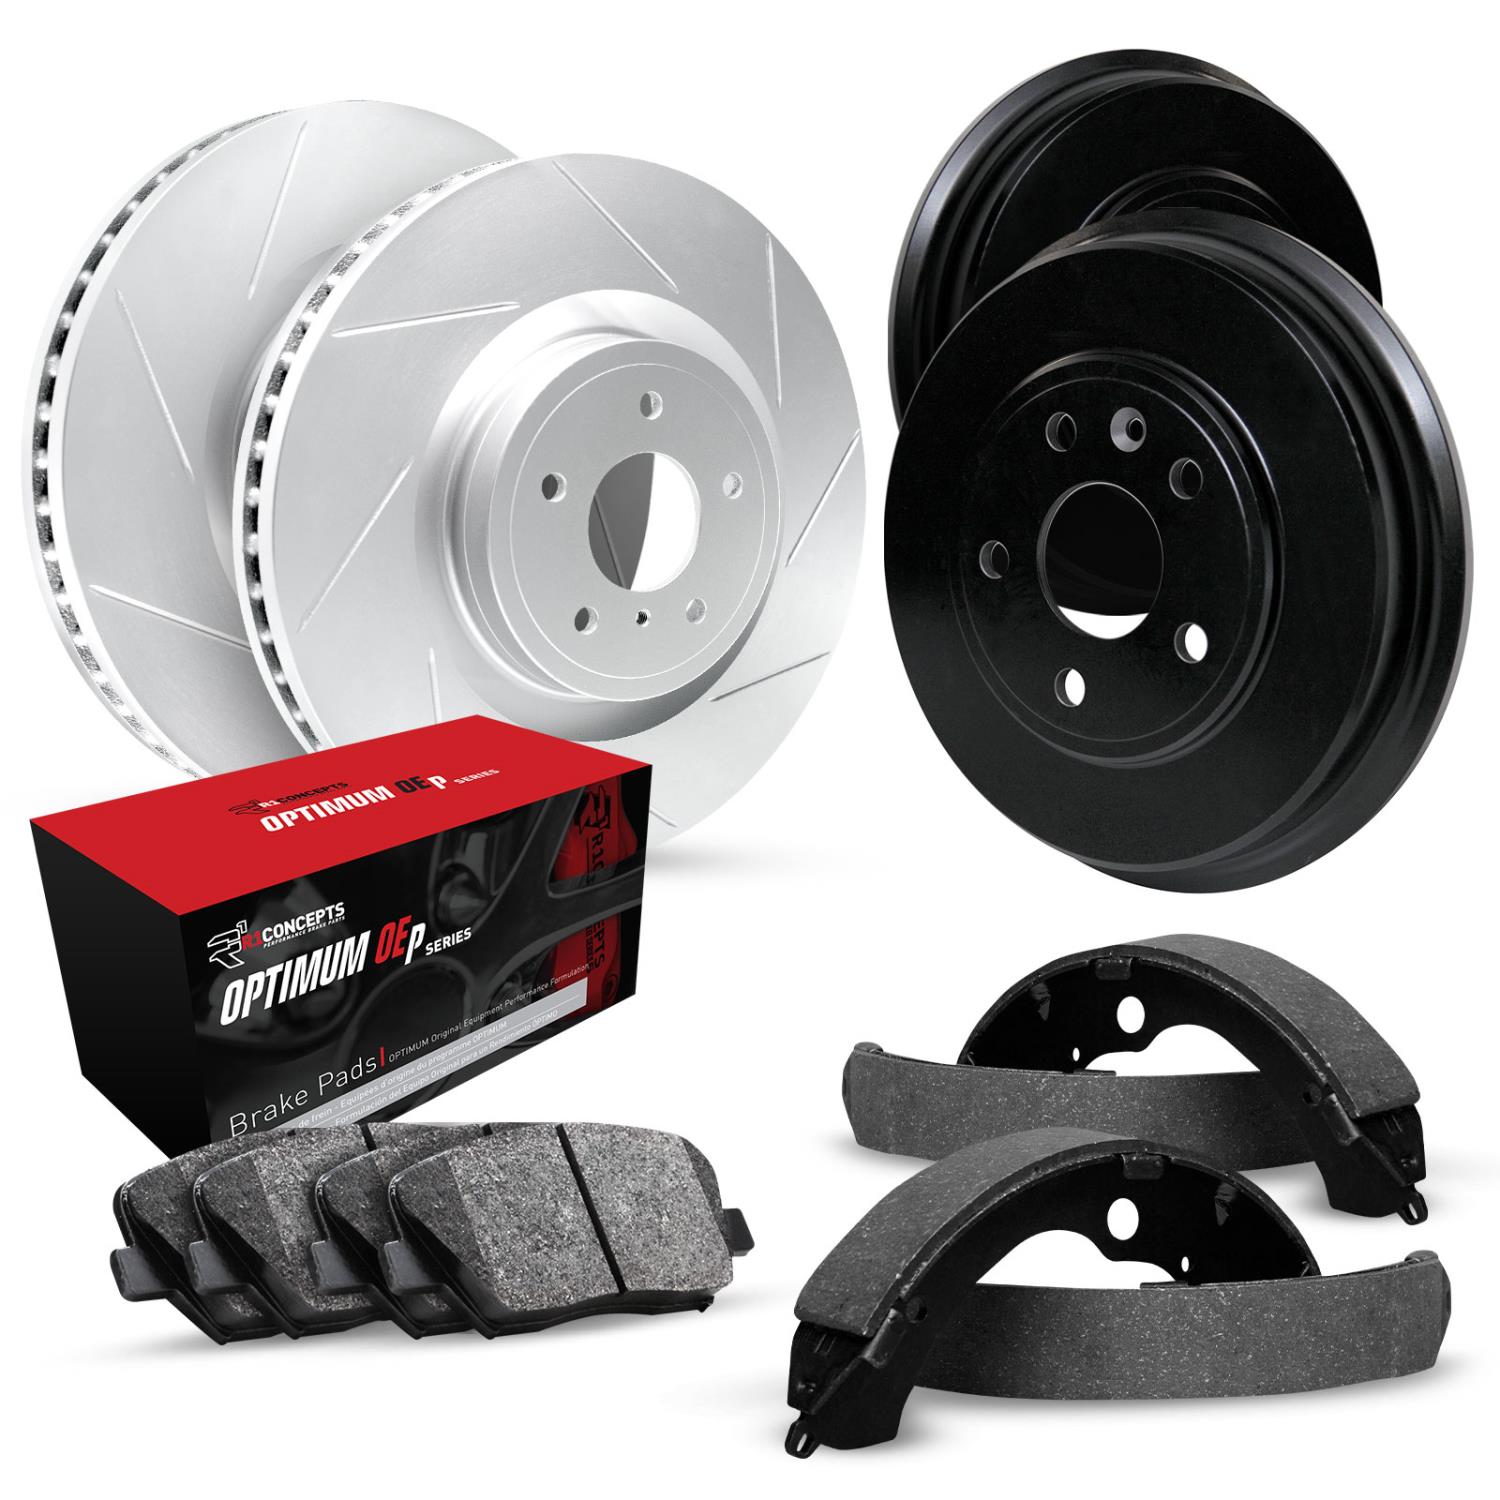 GEO-Carbon Slotted Brake Rotor & Drum Set w/Optimum OE Pads & Shoes, 2001-2006 Infiniti/Nissan, Position: Front & Rear